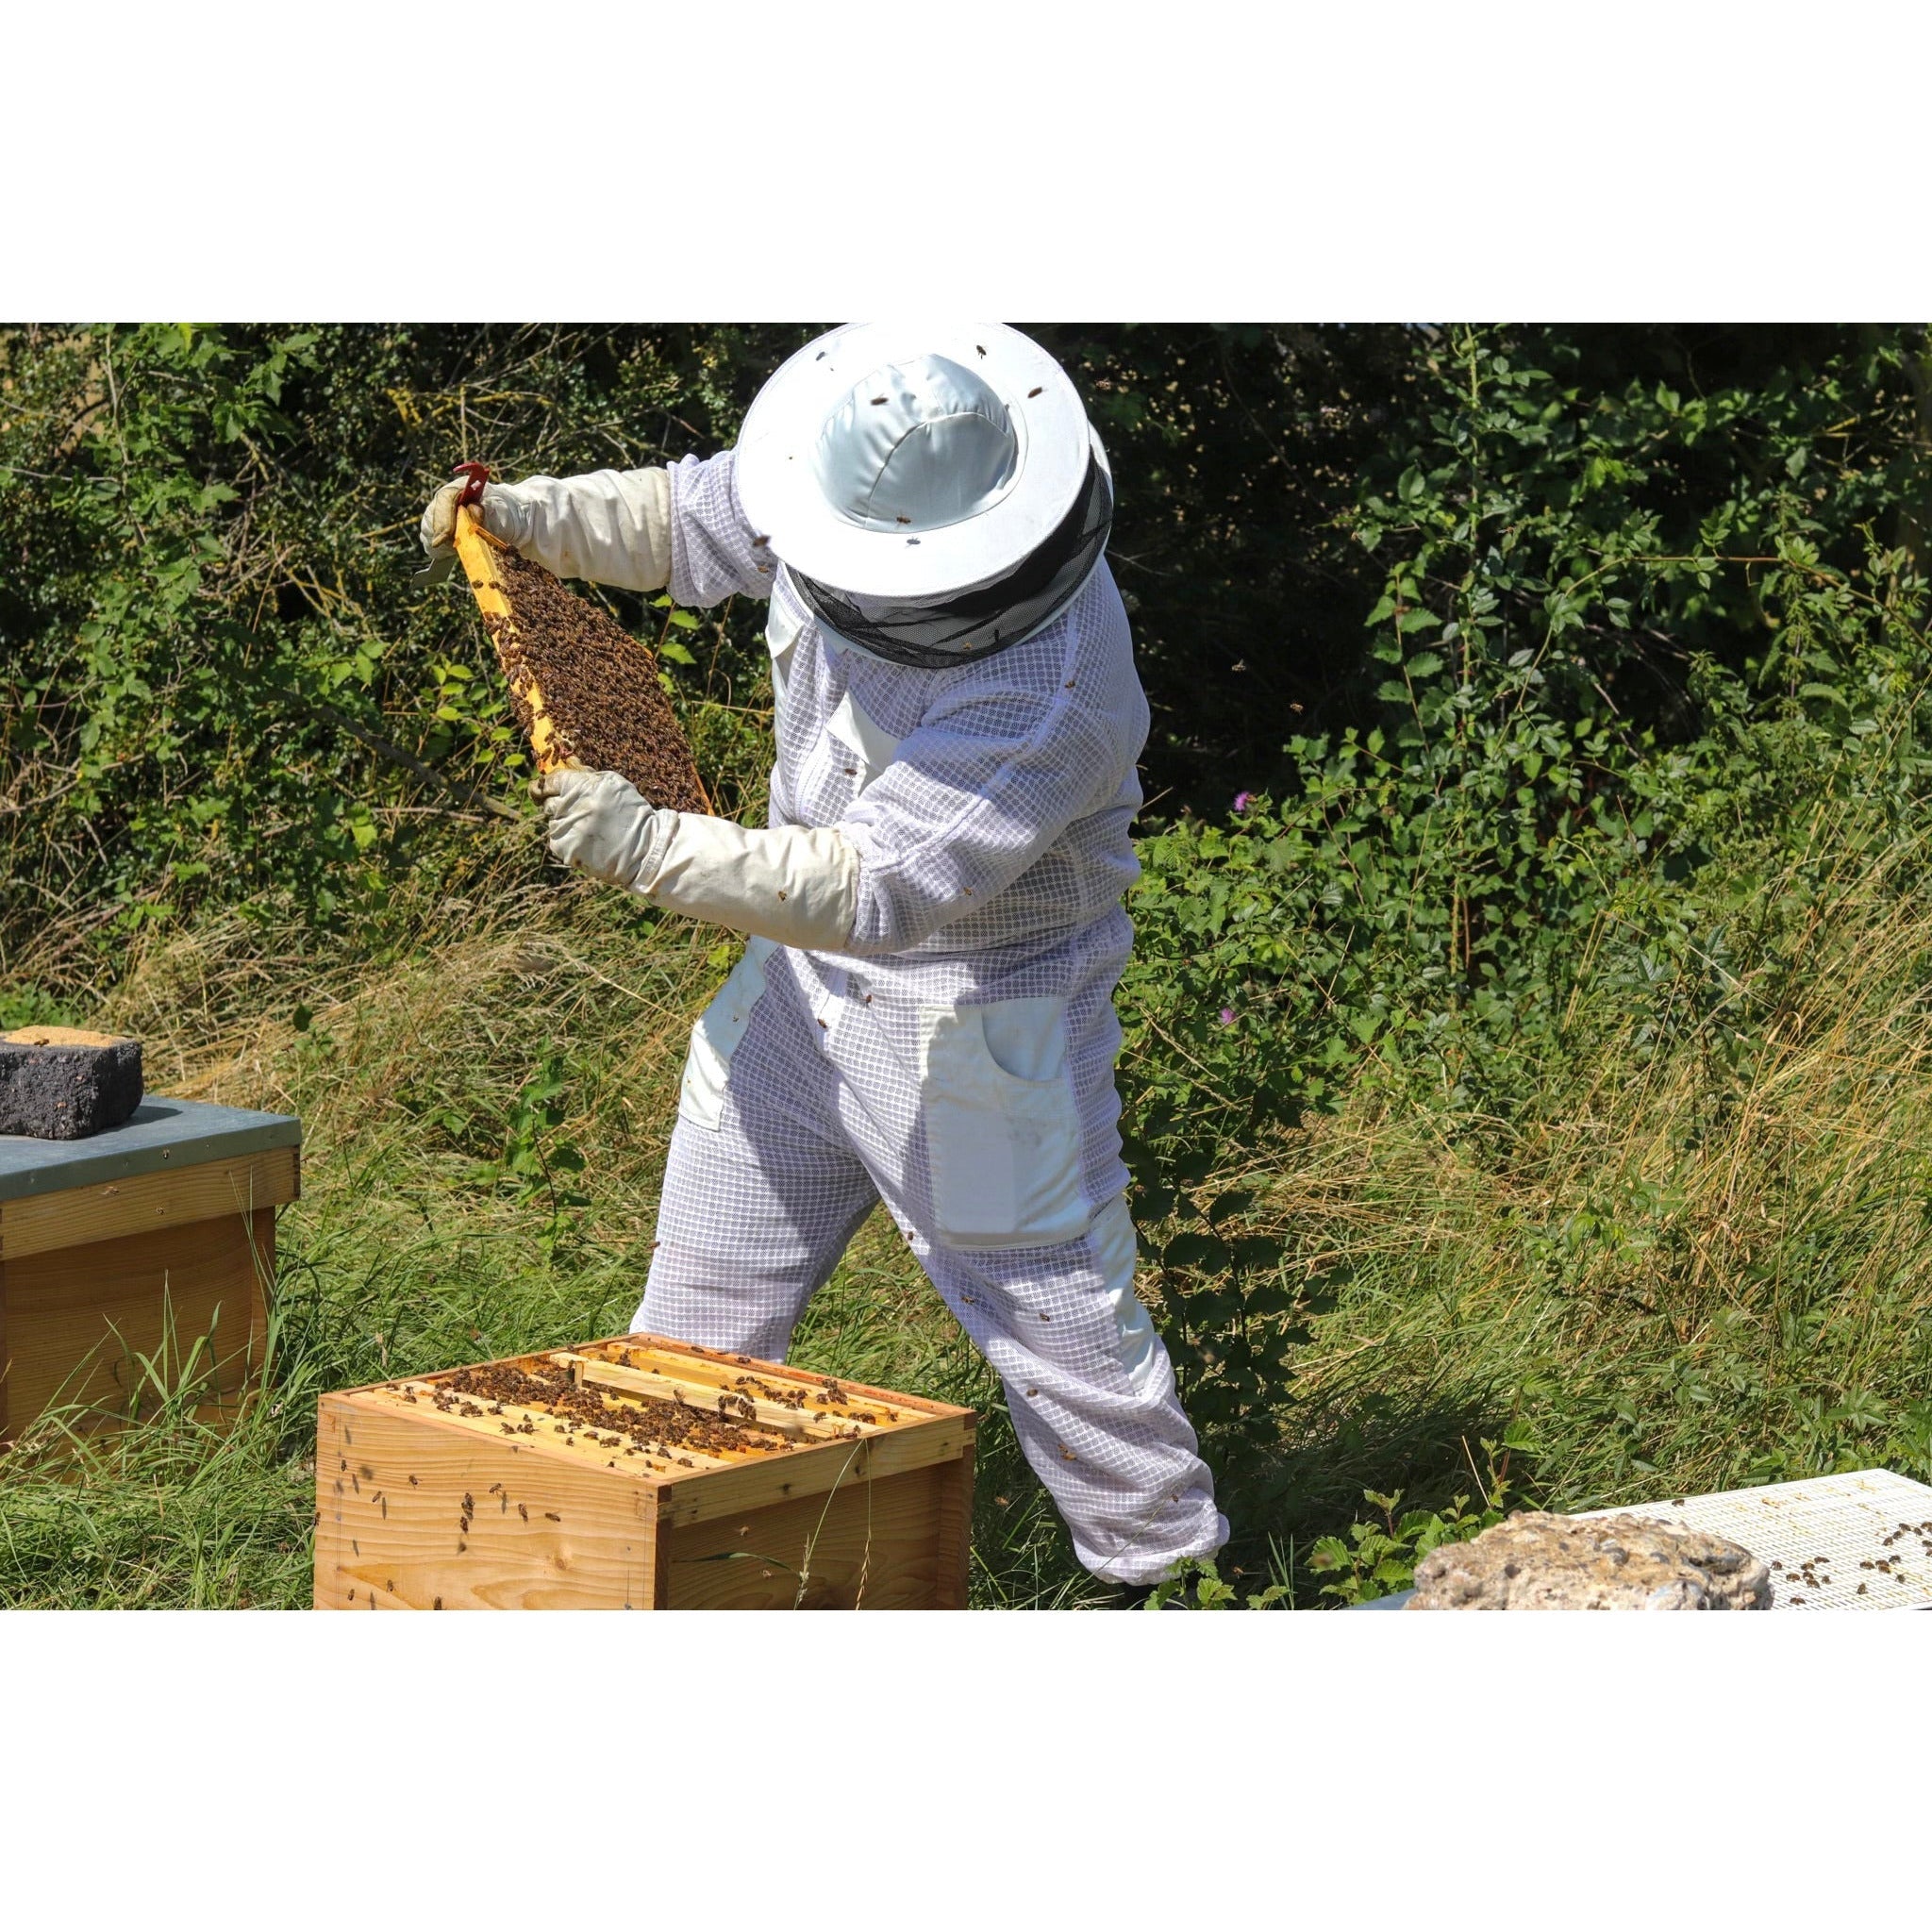 Parent & Child - Bee Keeping Experience - Essex